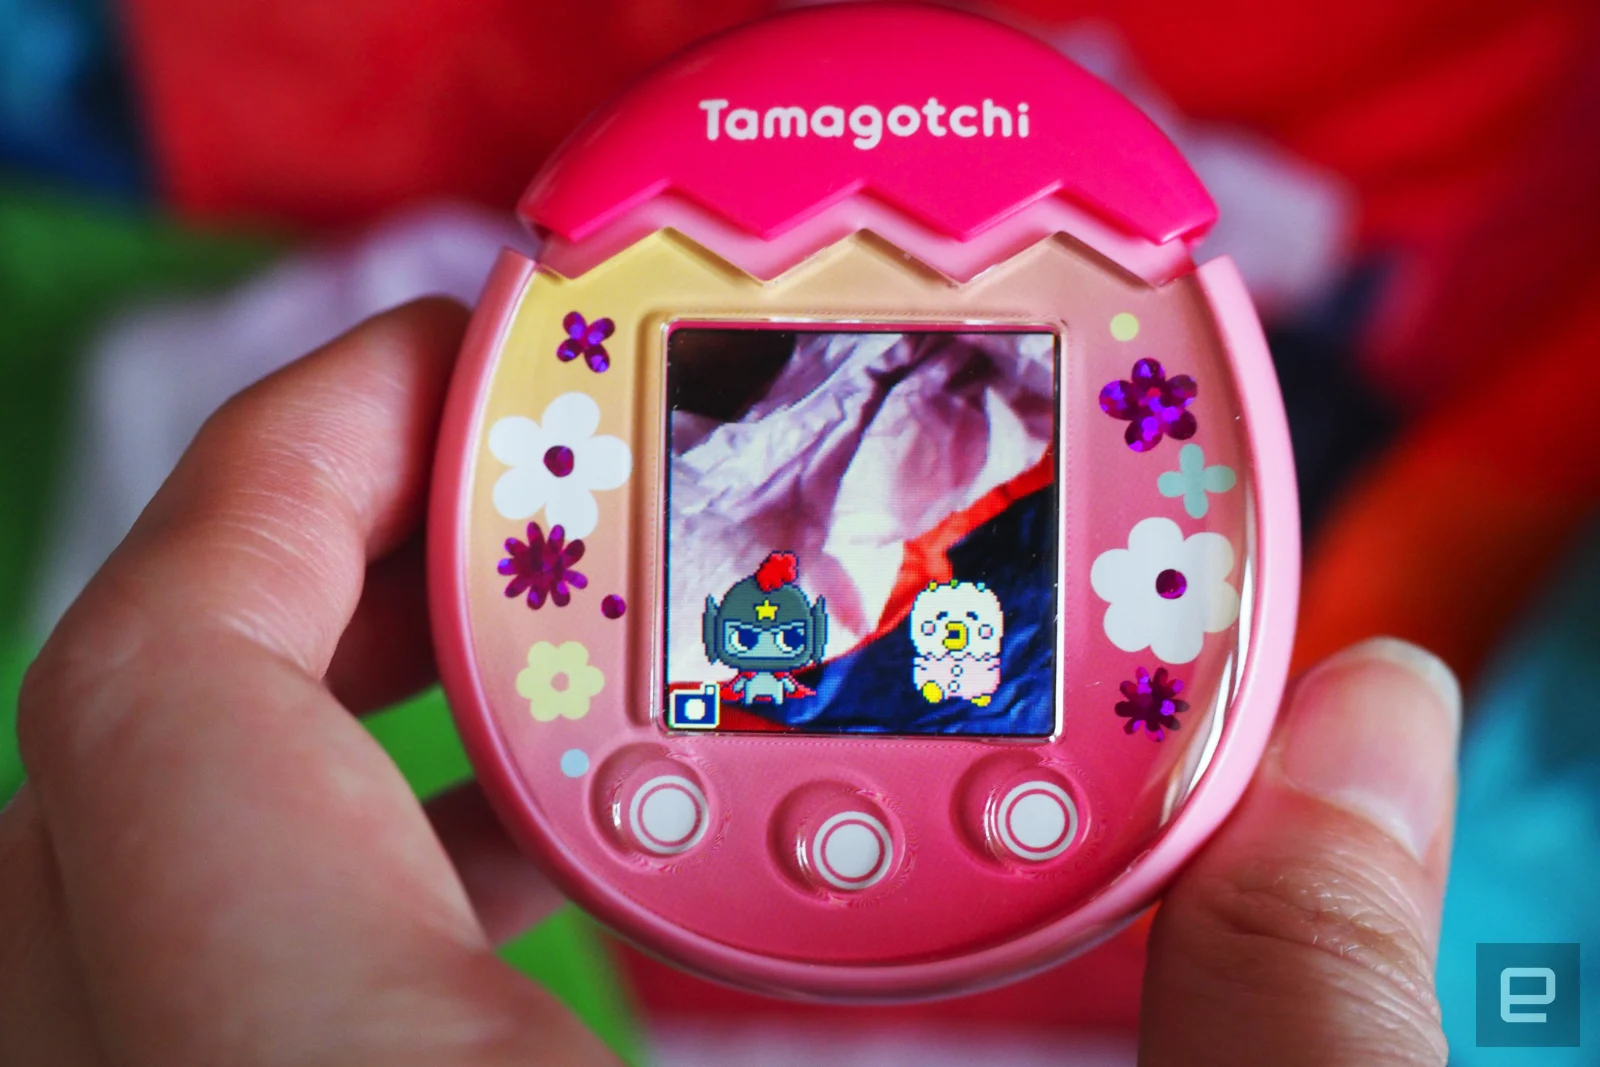 Tamagotchi Pix with two creatures on the screen